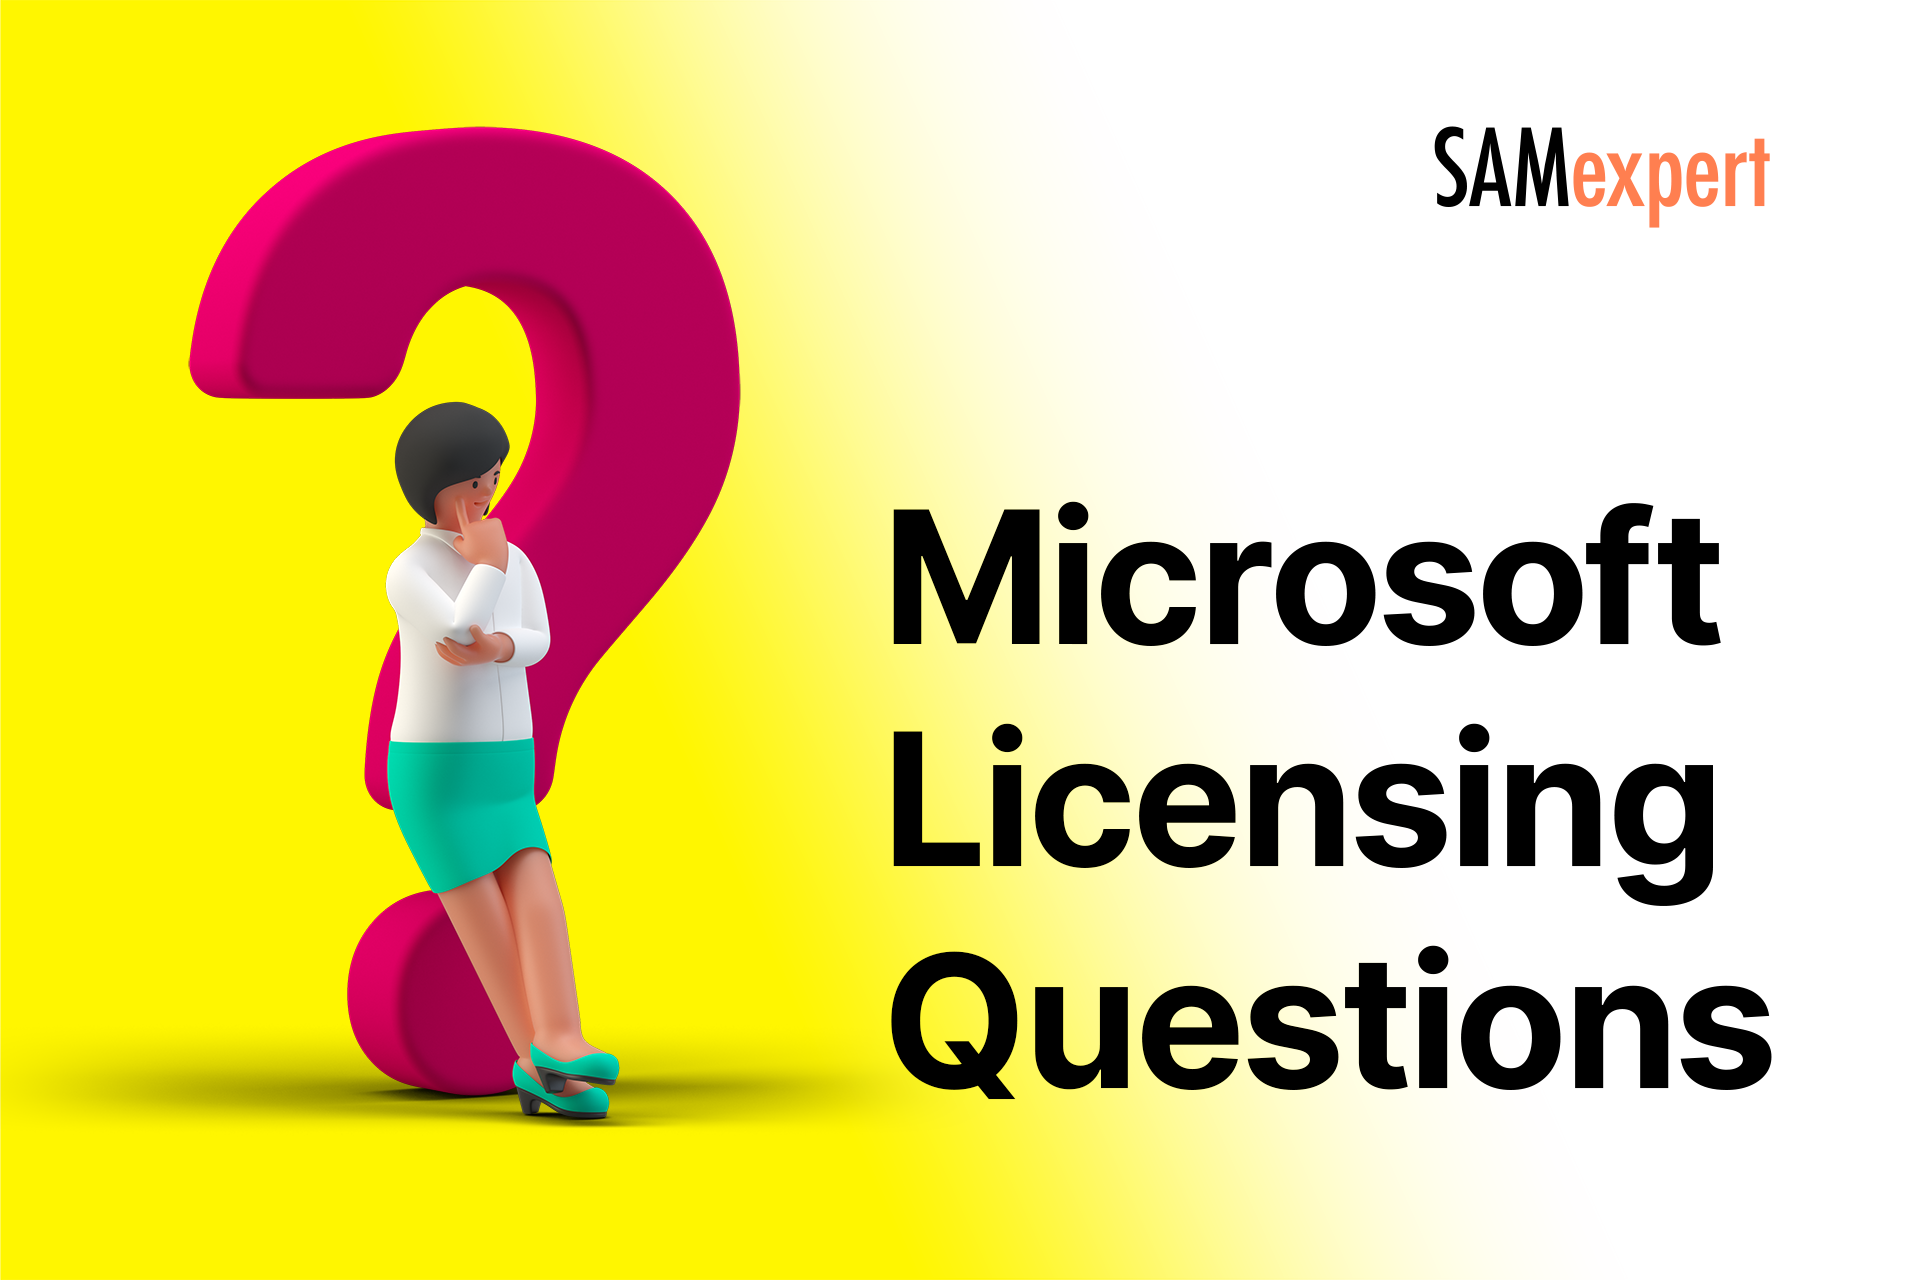 Microsoft licensing questions